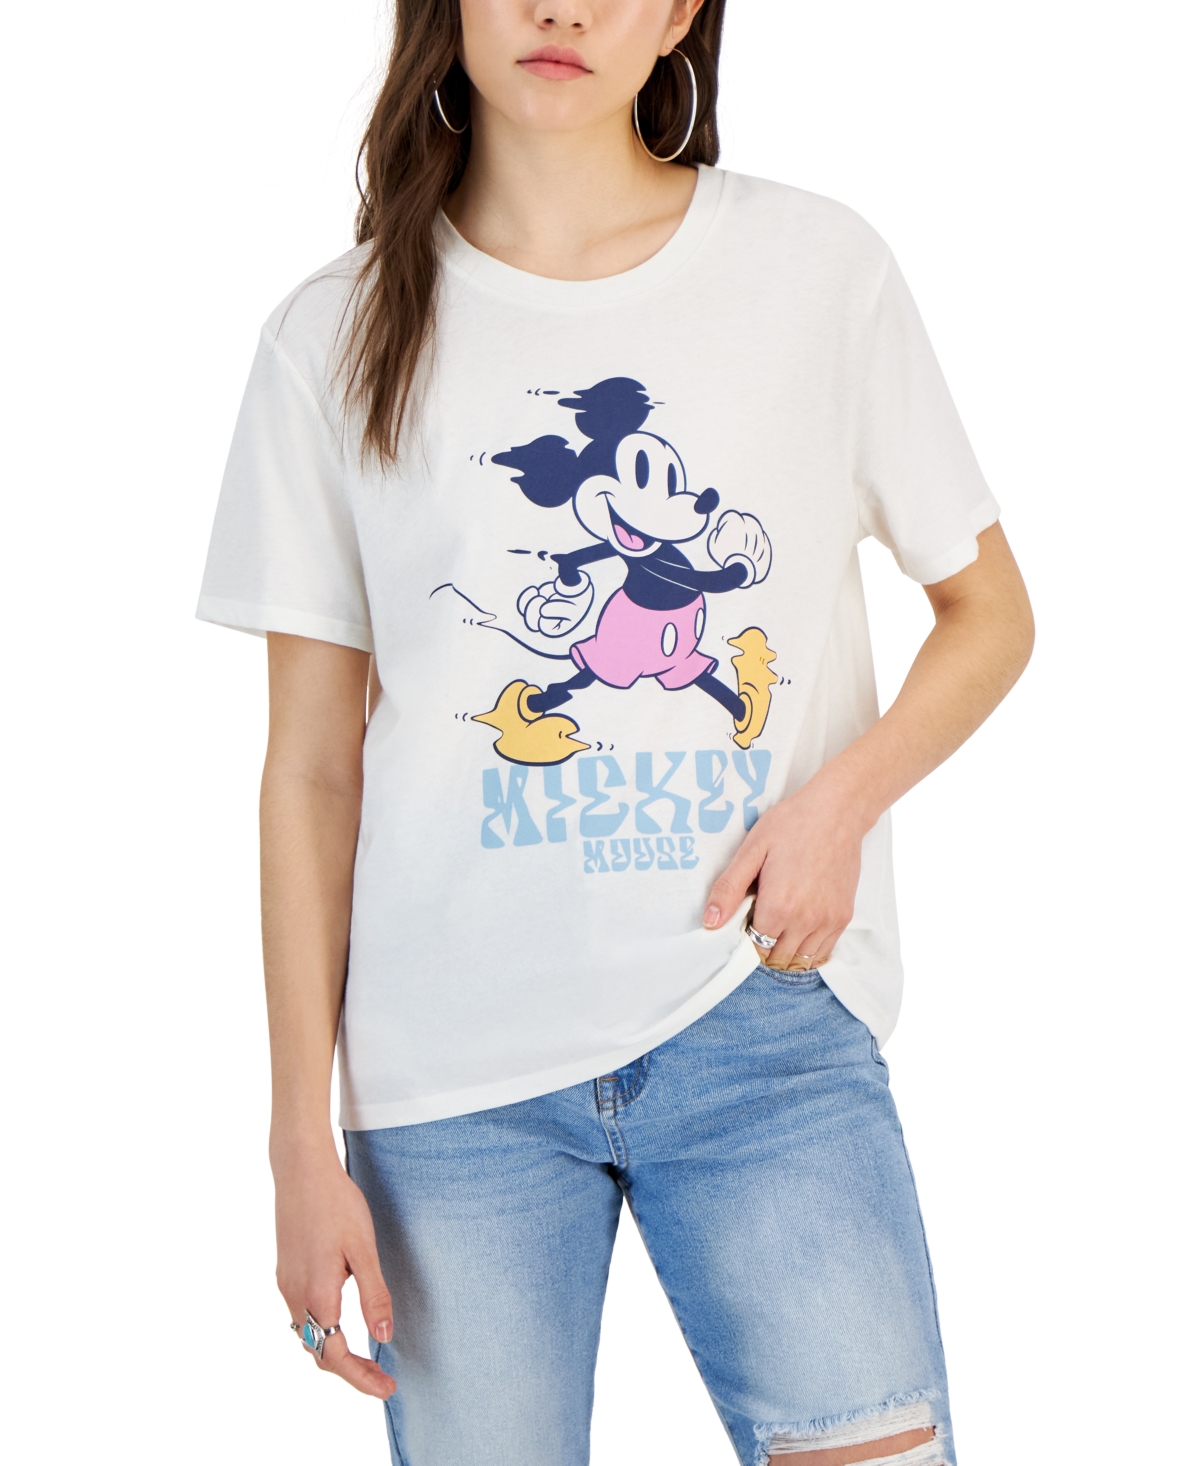 Disney Juniors' Mickey Mouse Graphic Short-sleeved T-shirt In Marshmallow